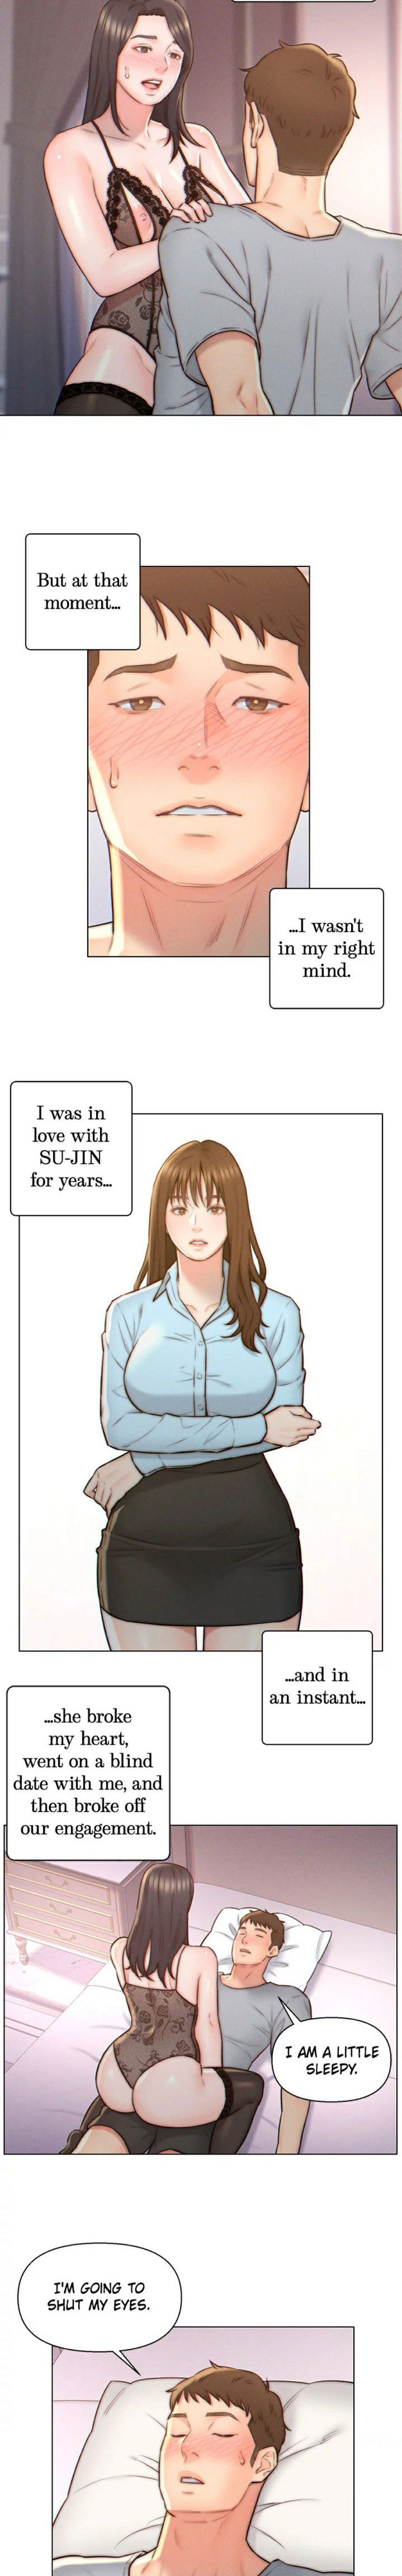 live-in-son-in-law-chap-4-3